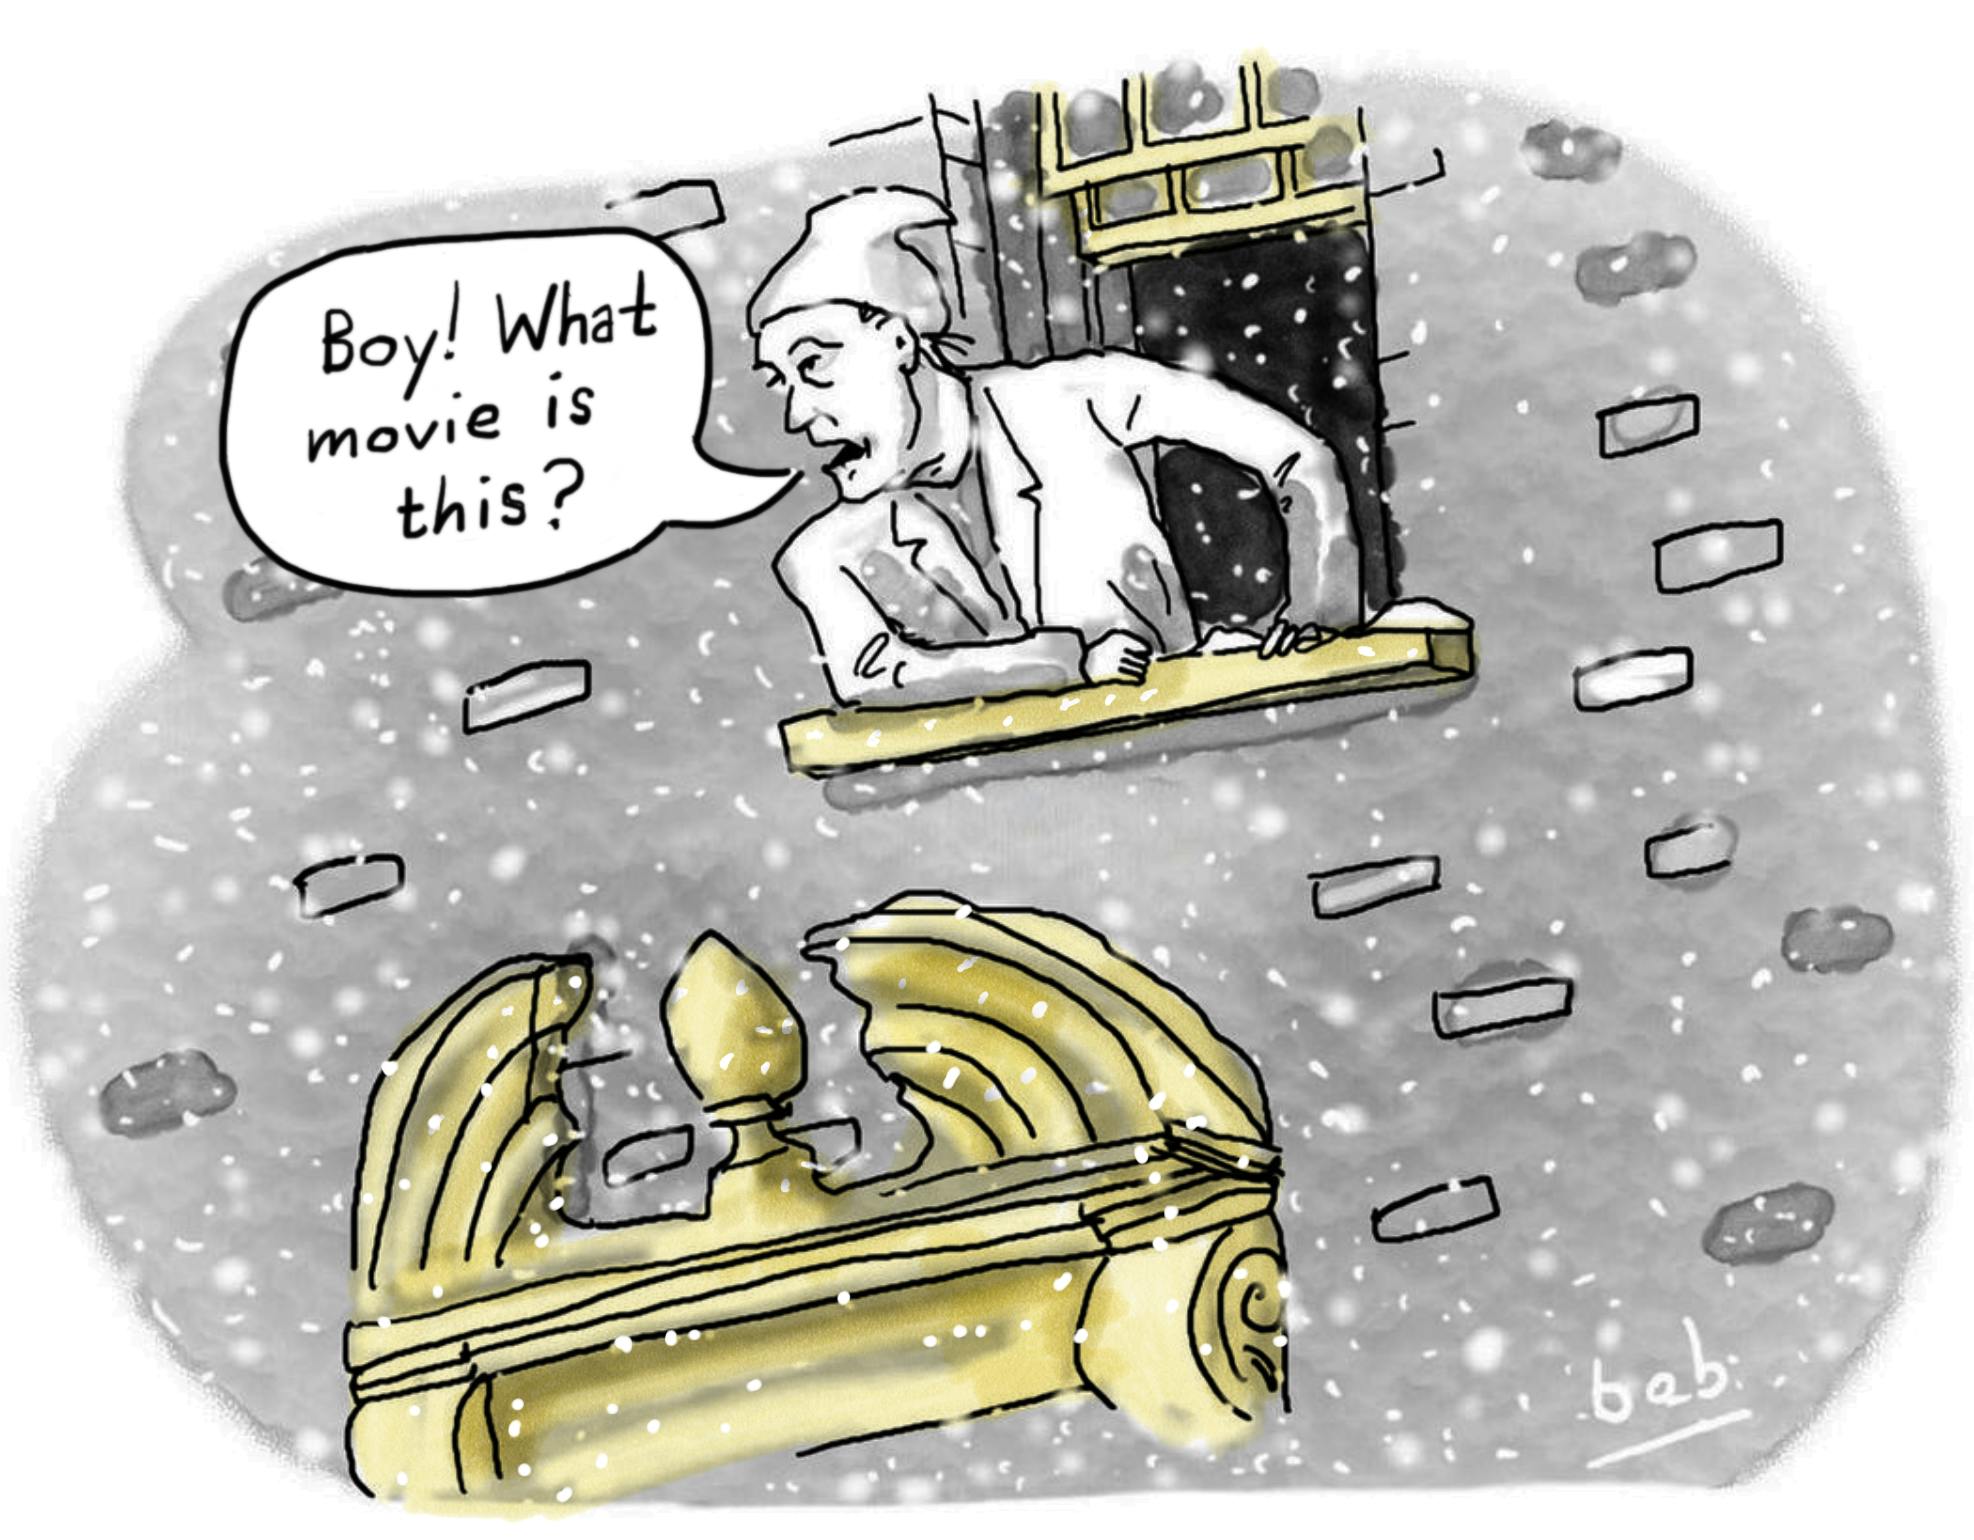 Cartoon by Bob Eckstein. Ebenezer Scrooge leans out his window on a snowy Christmas morning and yells to the street below, “Boy! What movie is this?”